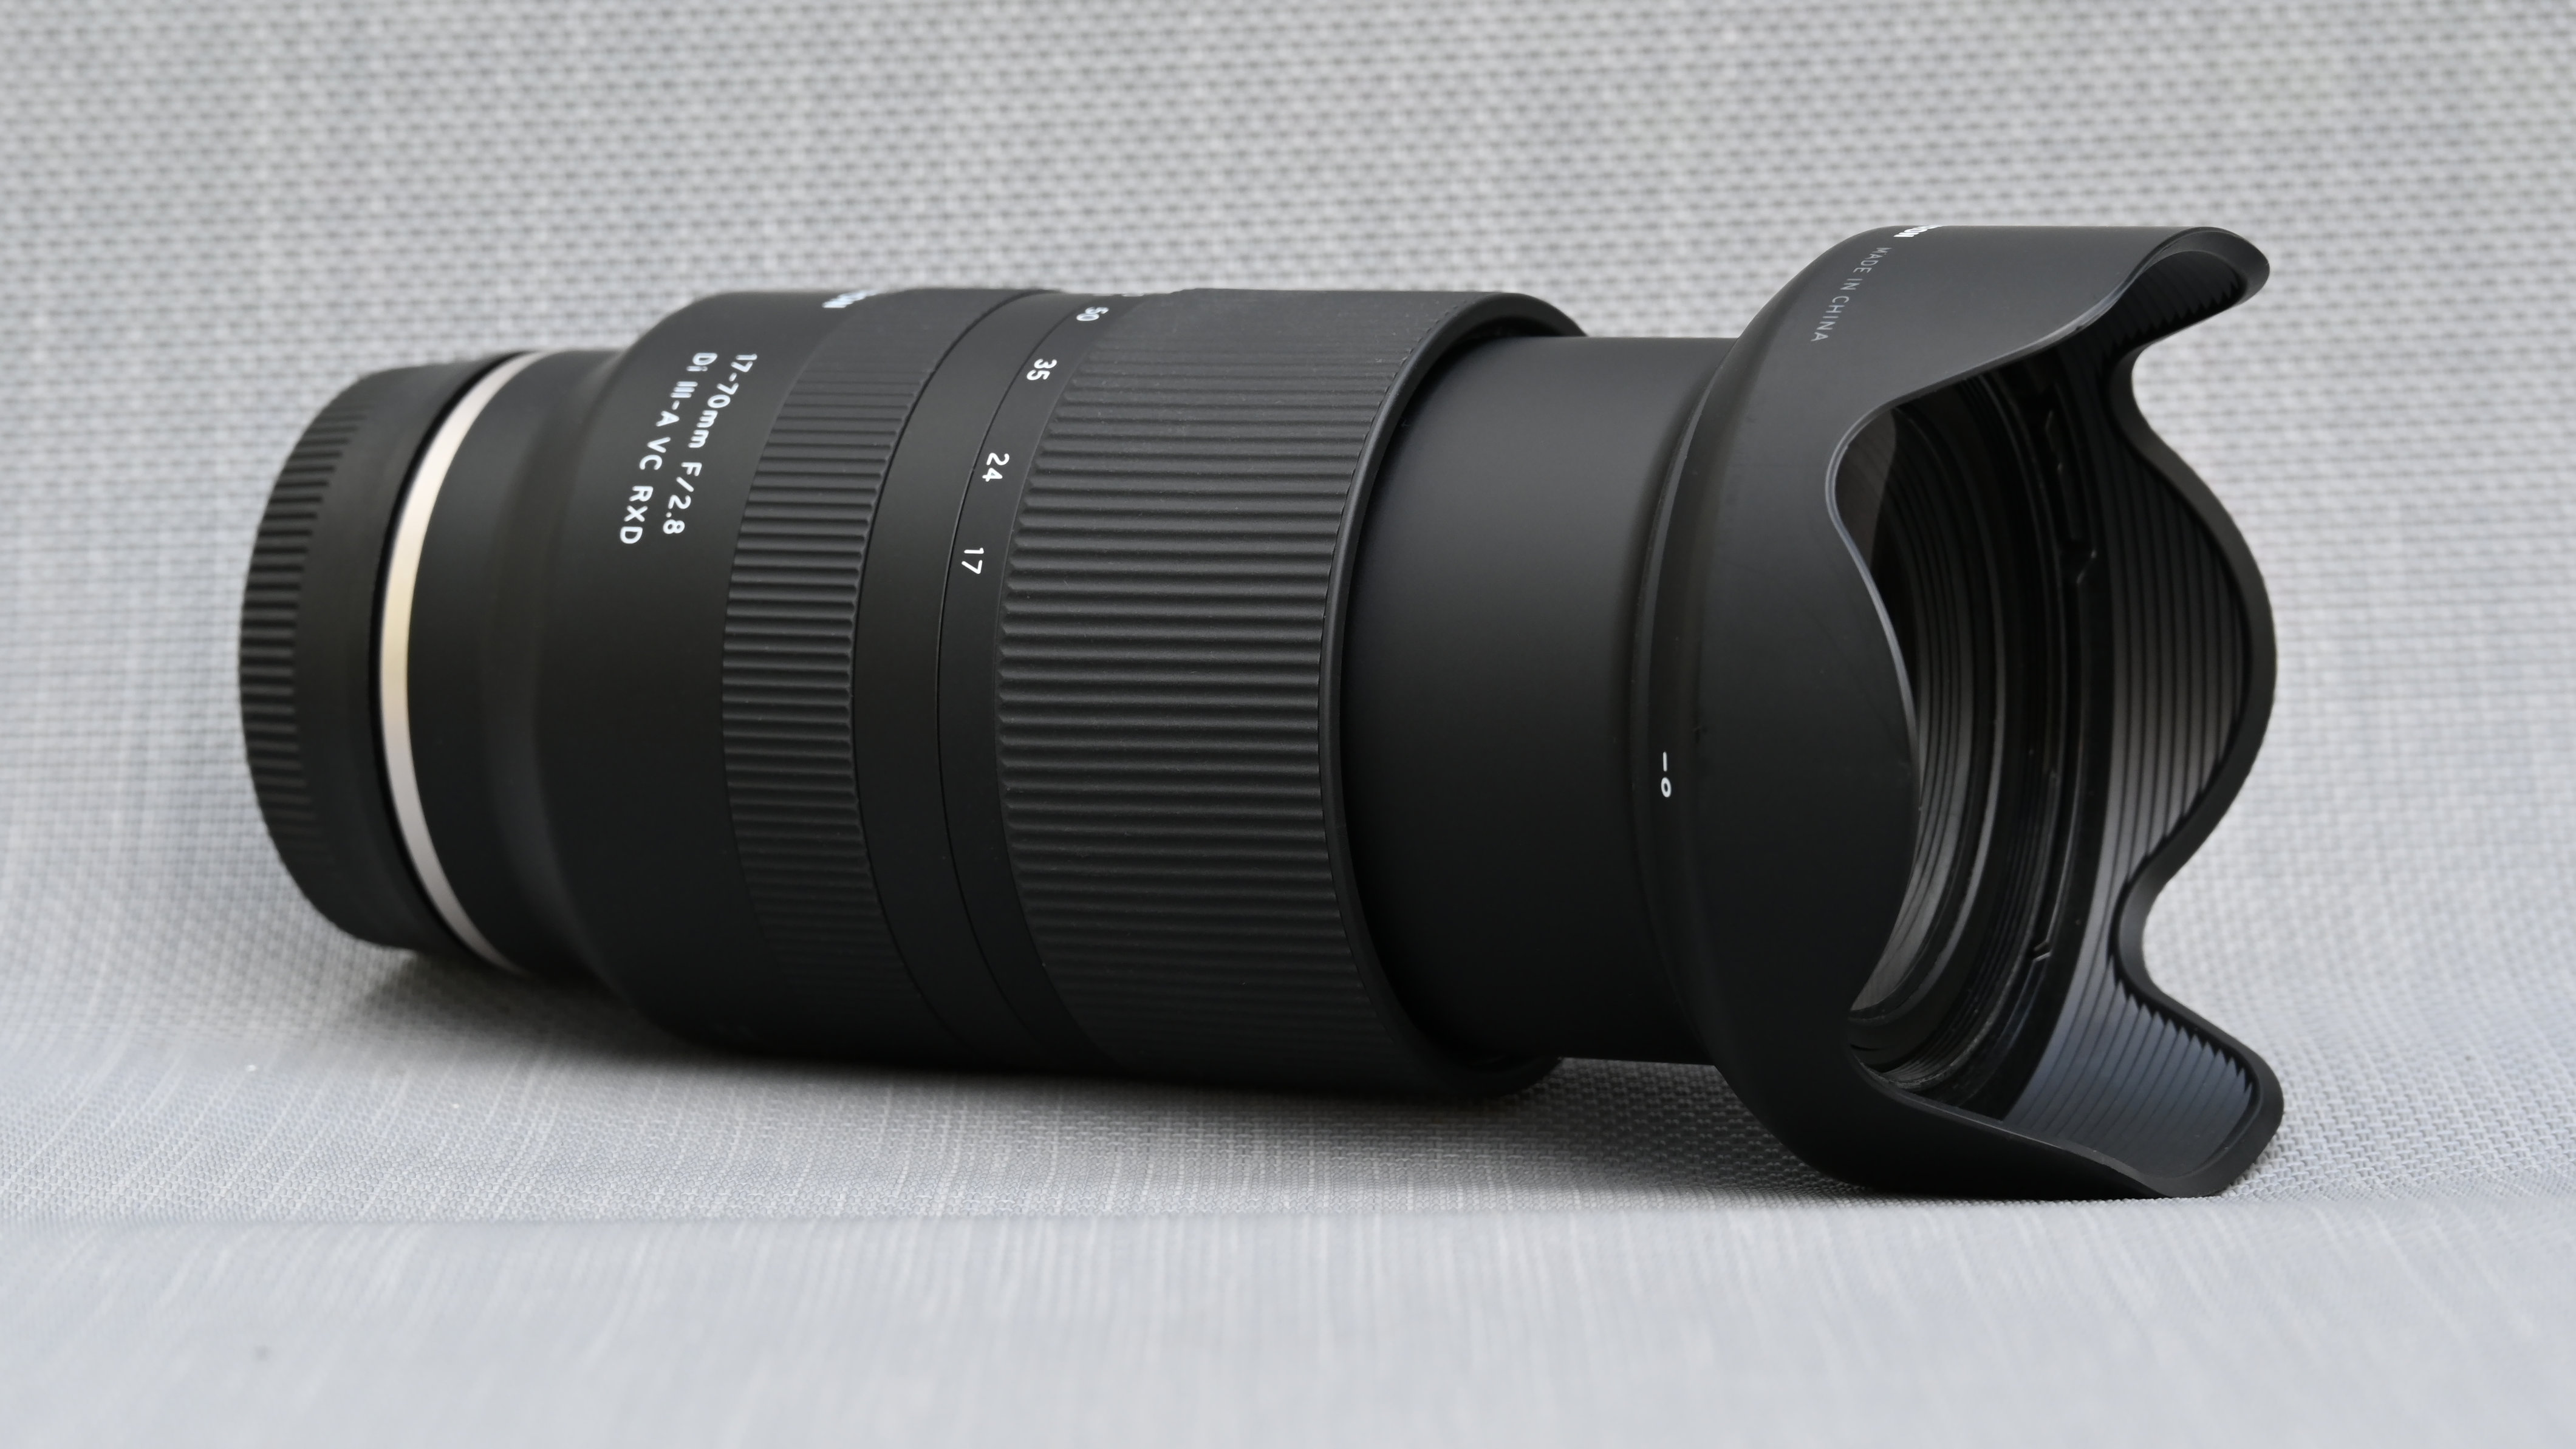 Tamron 17-70mm F/2.8 Di III-A VC RXD Standard Zoom Lens for Sony E-Mount  AFB070S700 - Best Buy